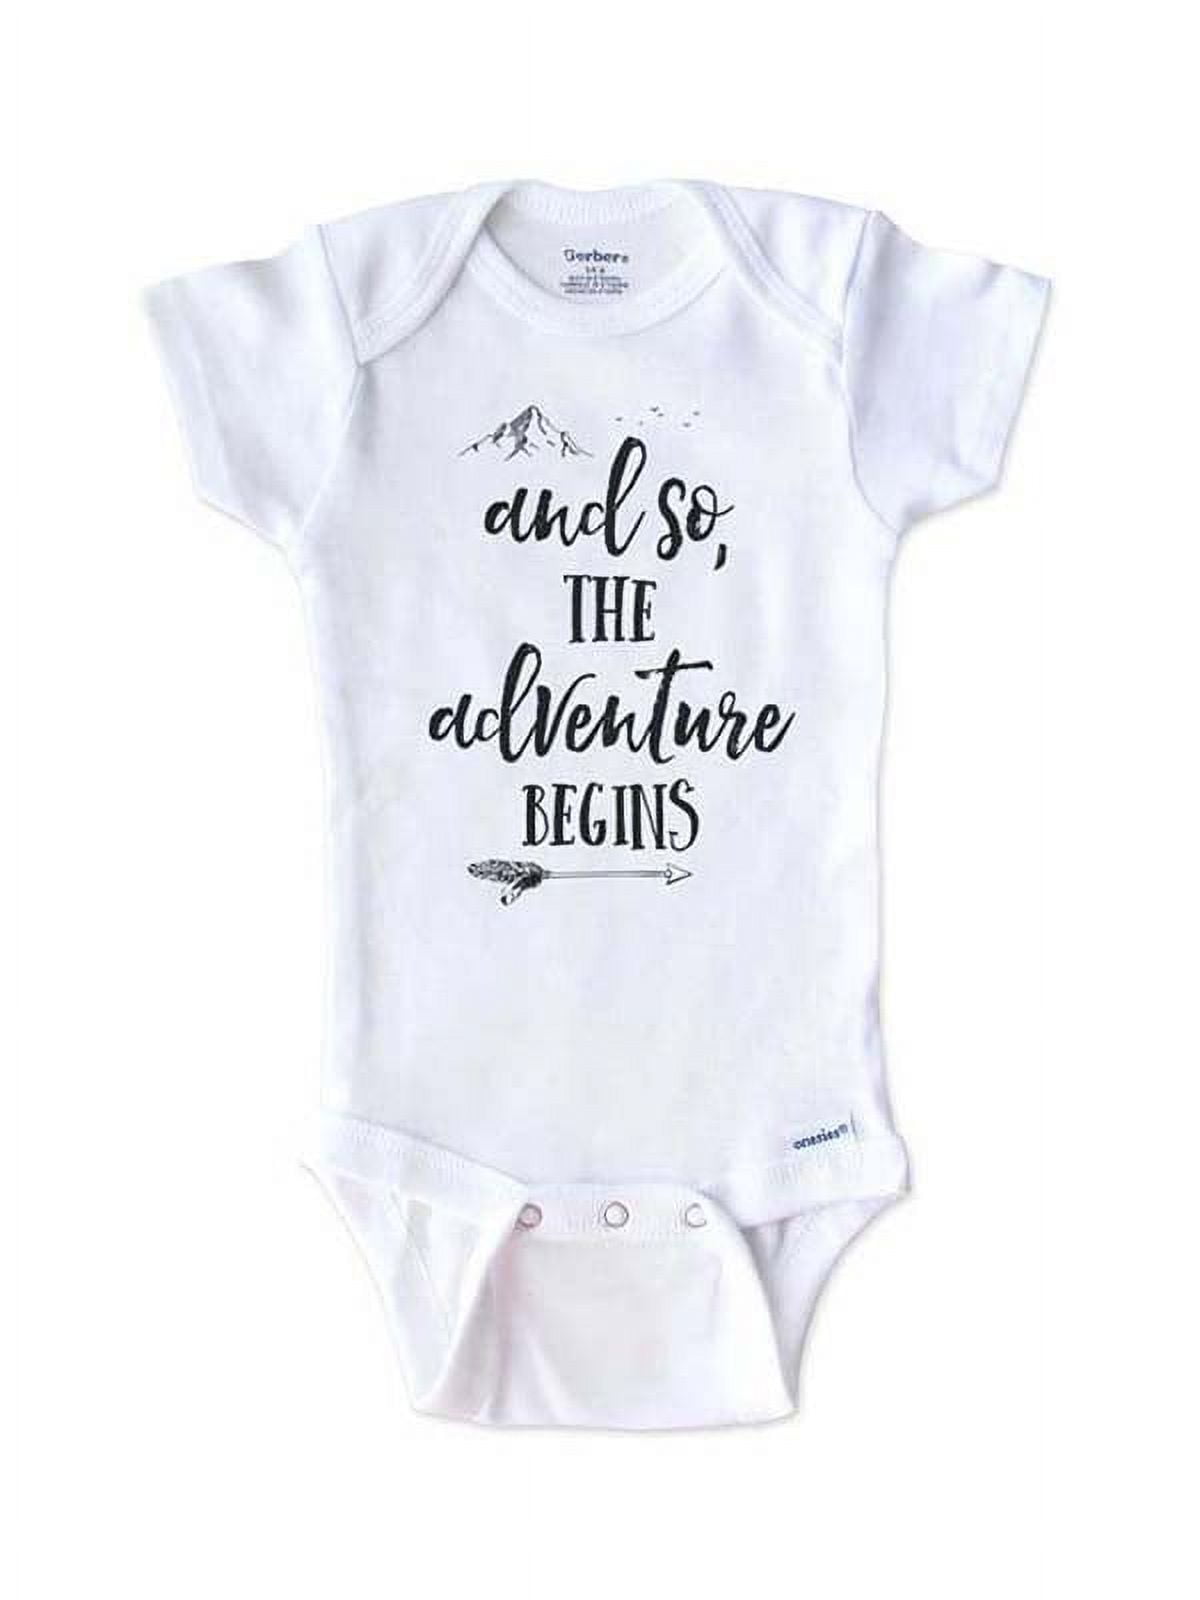 Baby Onesie Personalized Brith Announcement for Boy/Girl.